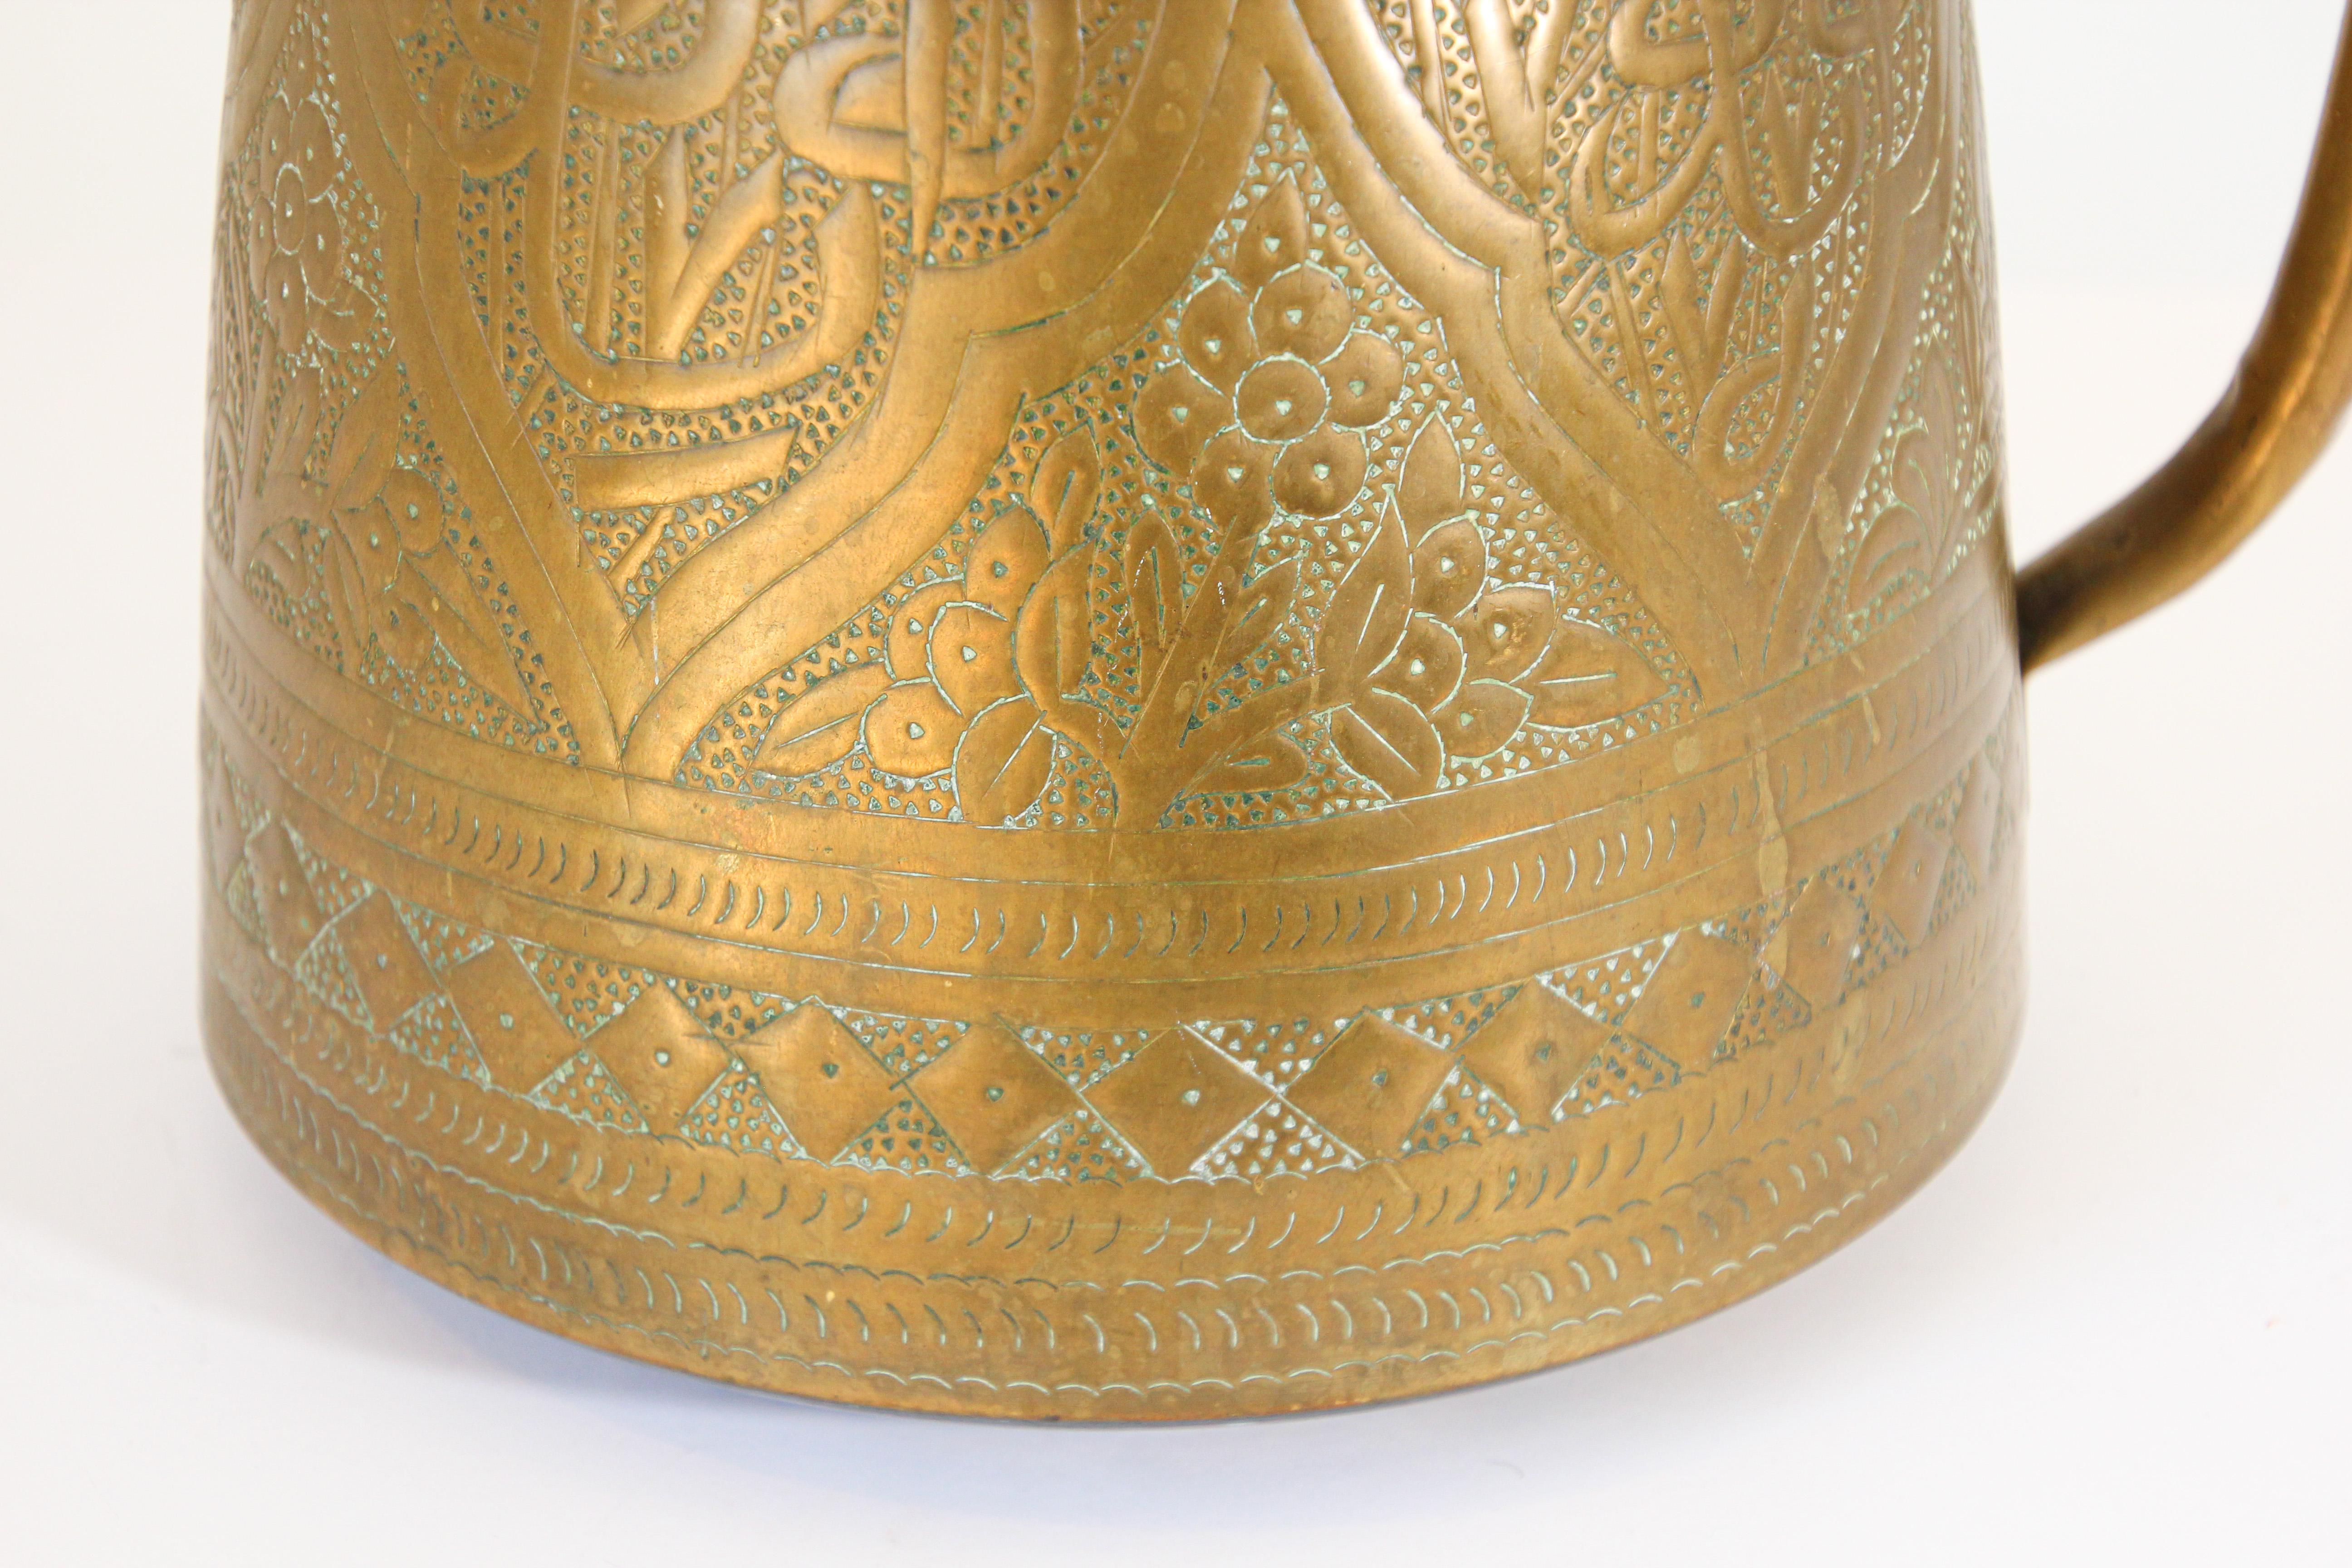 Hand-Crafted Middle Eastern Arabic Brass Pot